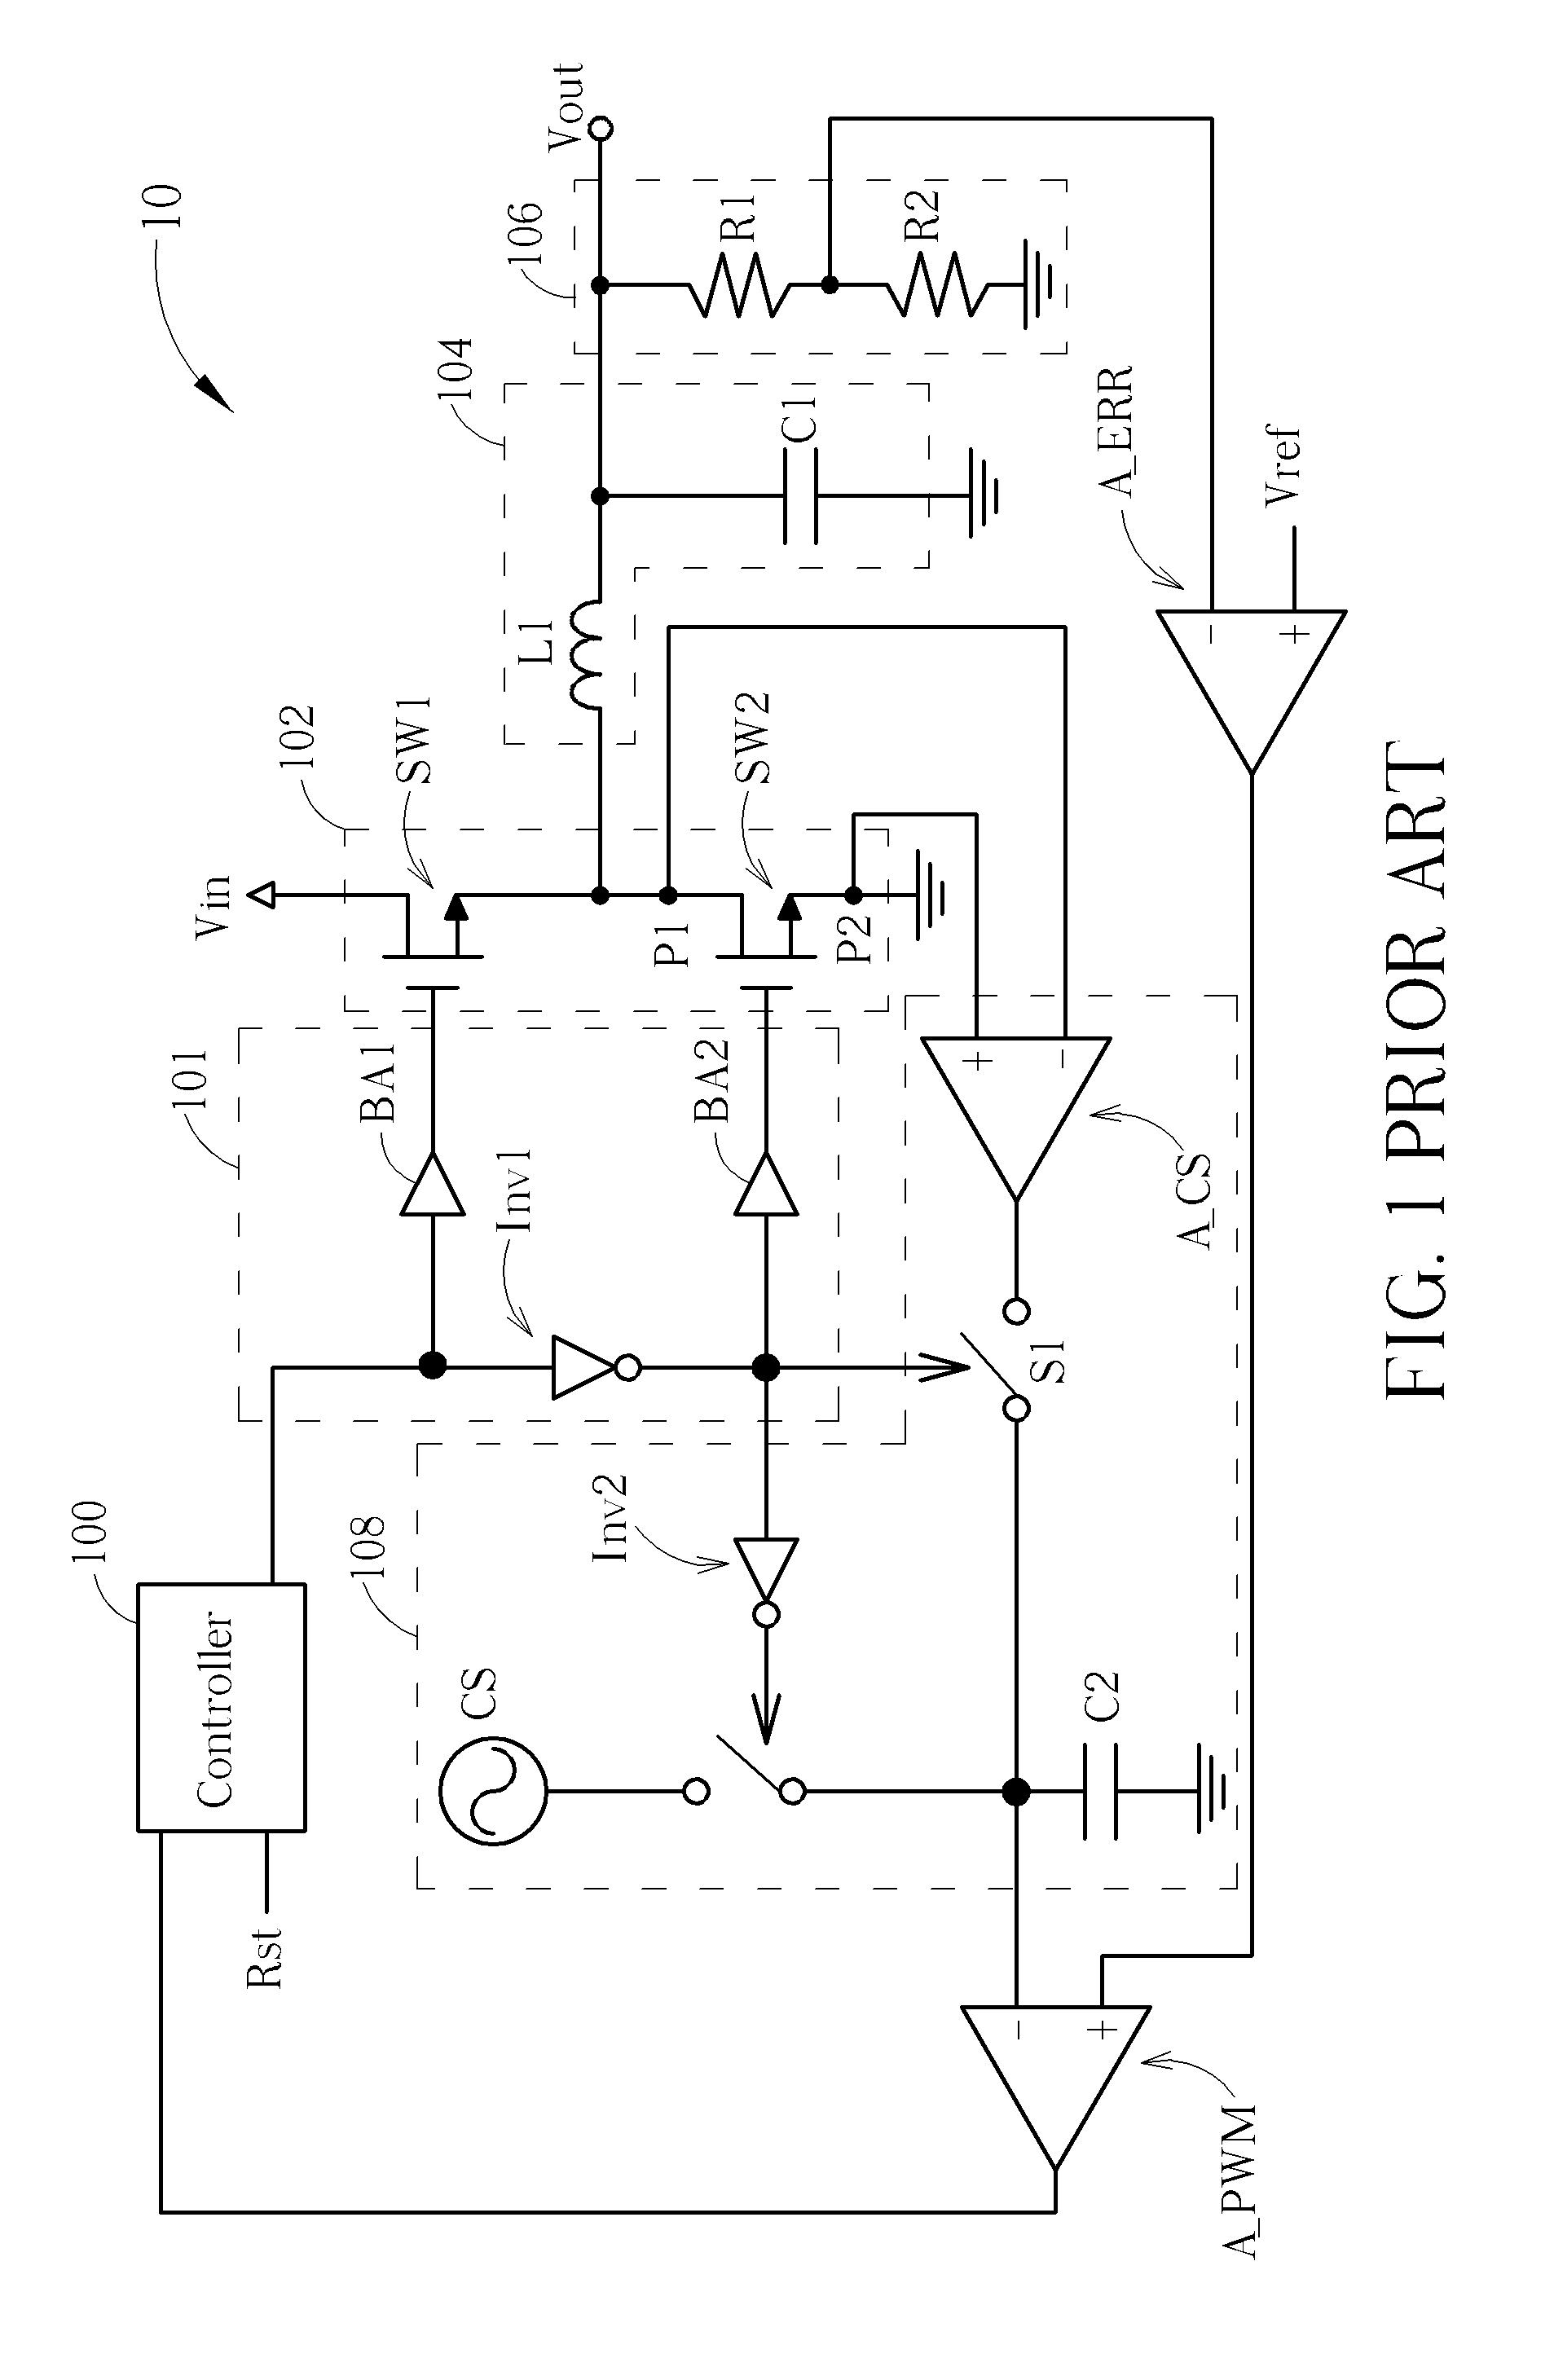 Method and Apparatus for All Duty Current Sensing in Current Mode Converter